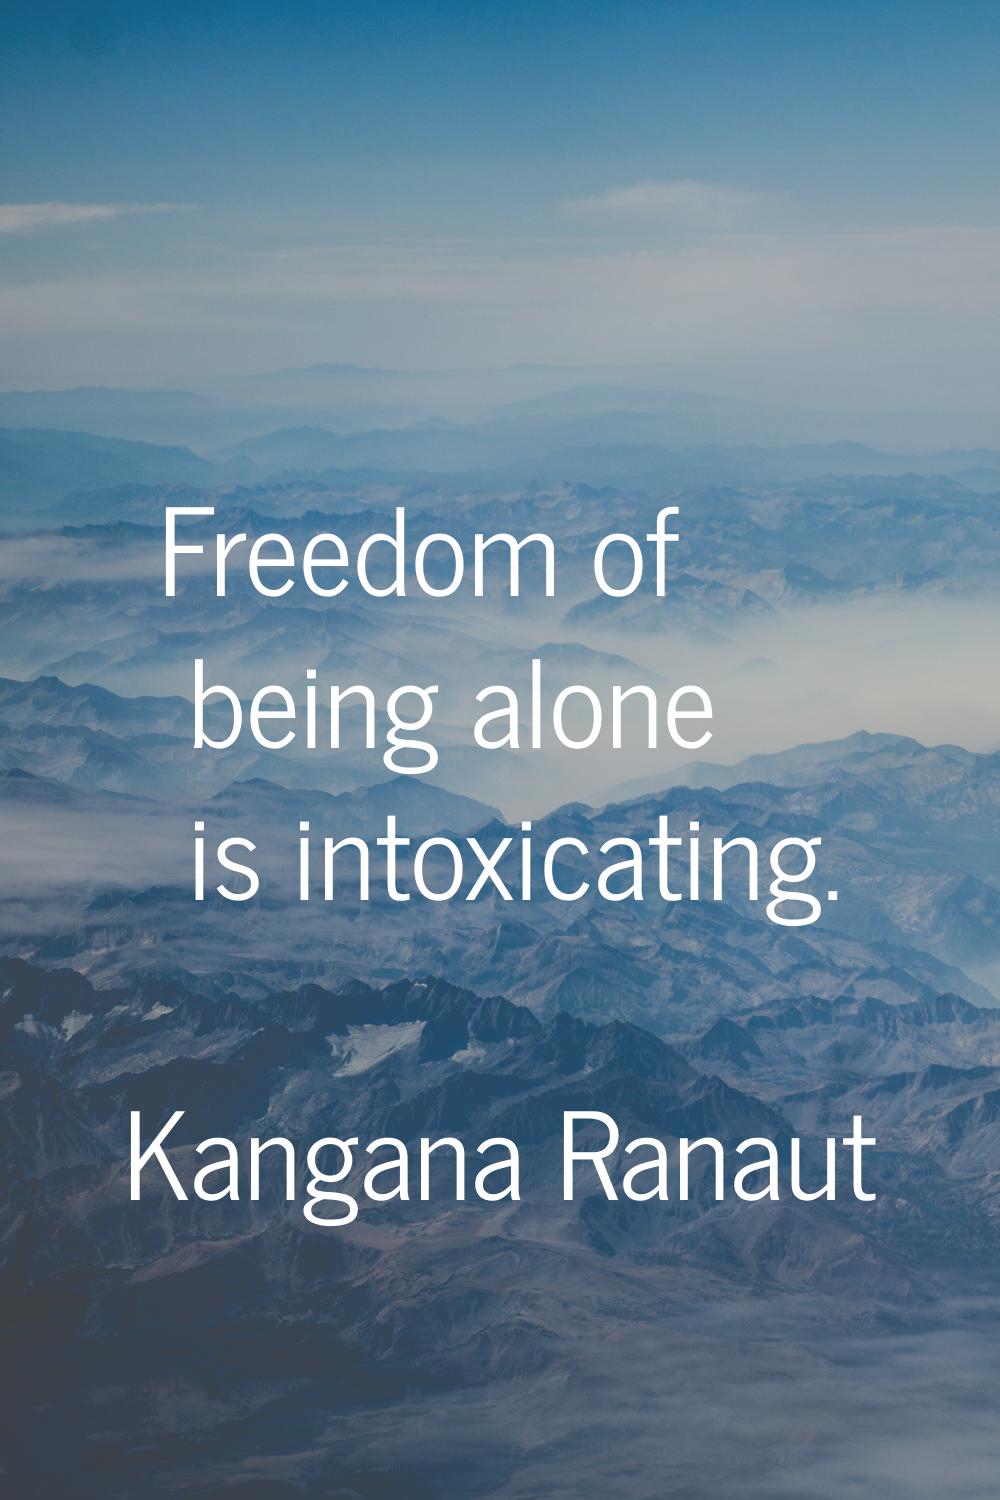 Freedom of being alone is intoxicating.